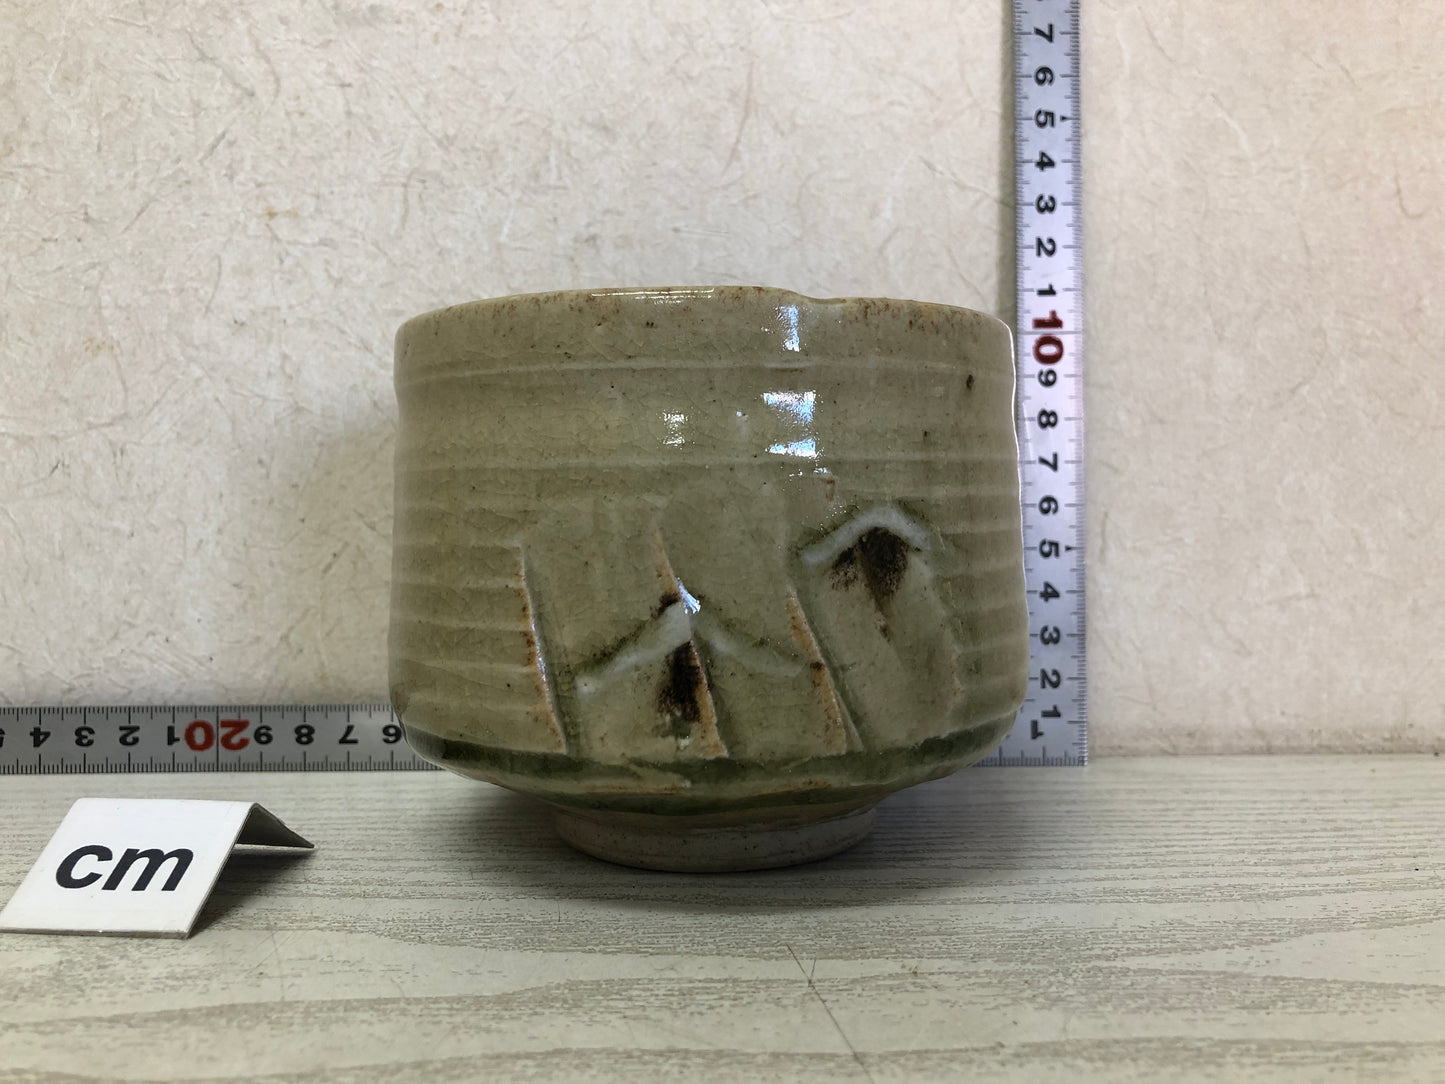 Y3738 CHAWAN Seto-ware signed Japan antique tea ceremony bowl cup pottery